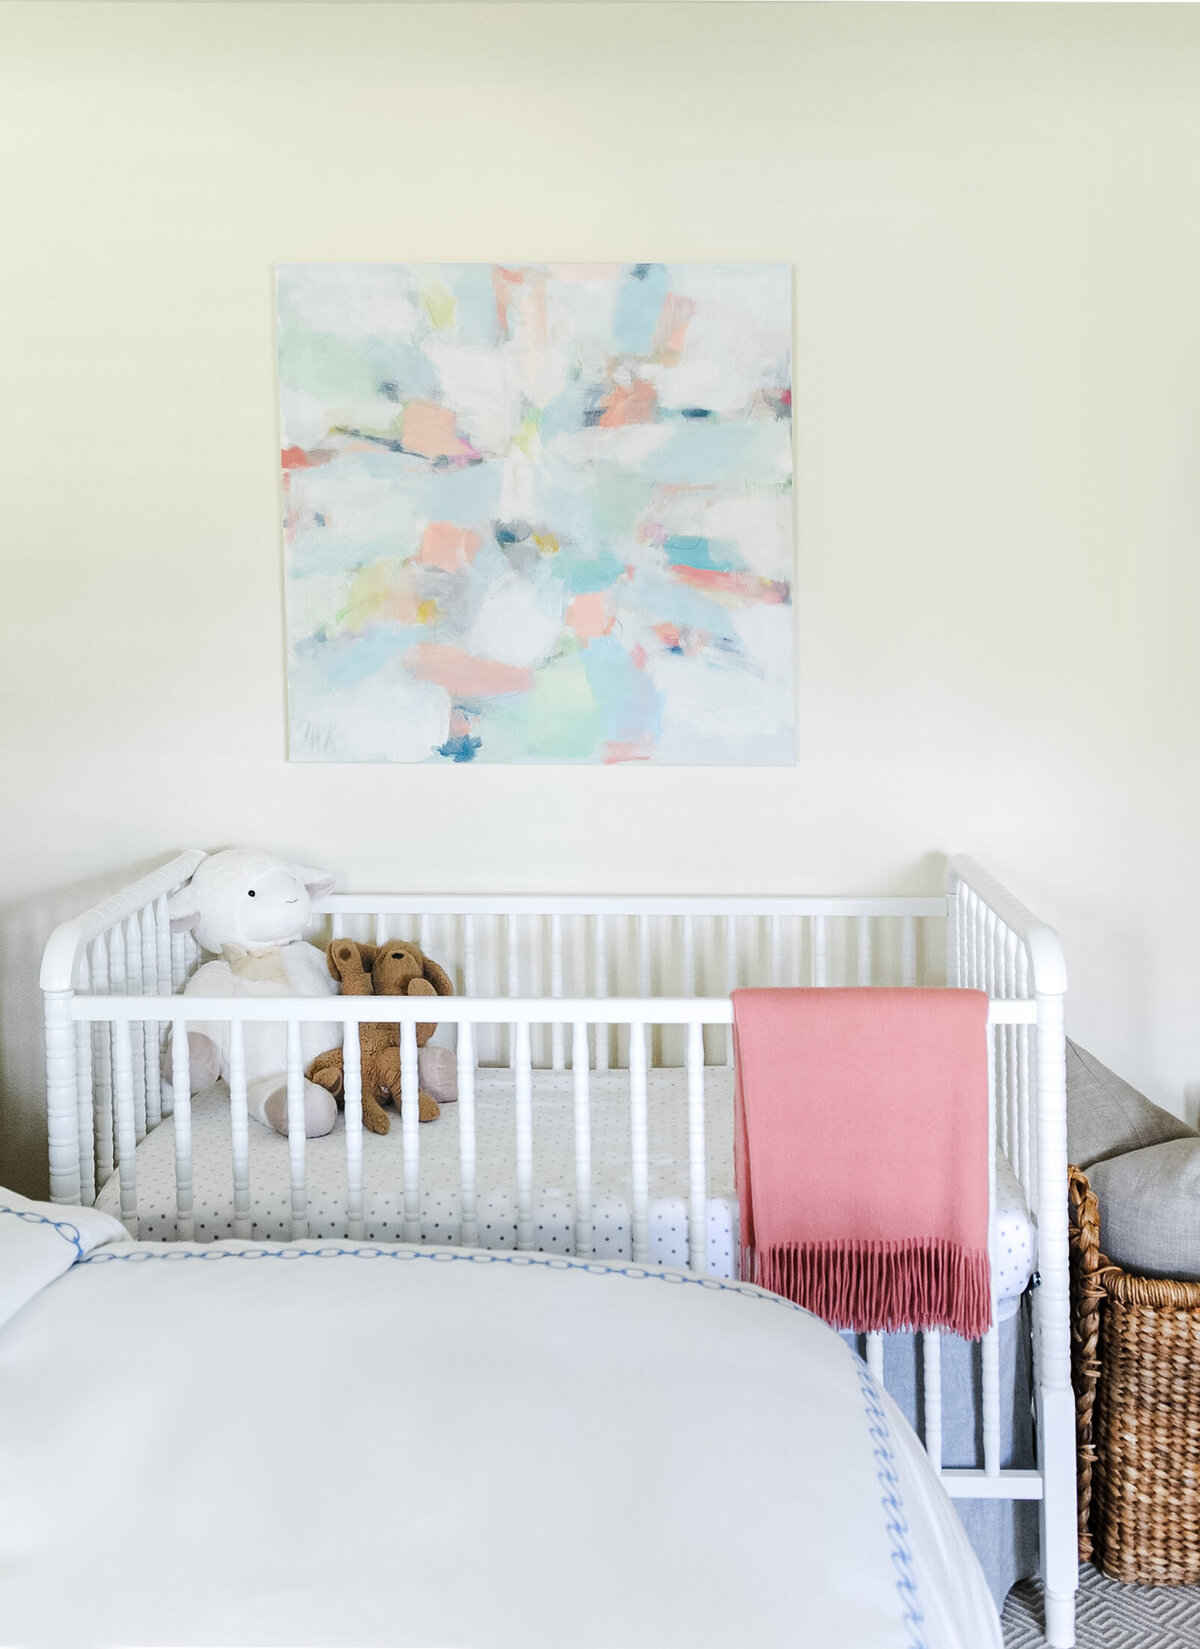 Nursery design inspiration featuring a  white crib and abstract artwork